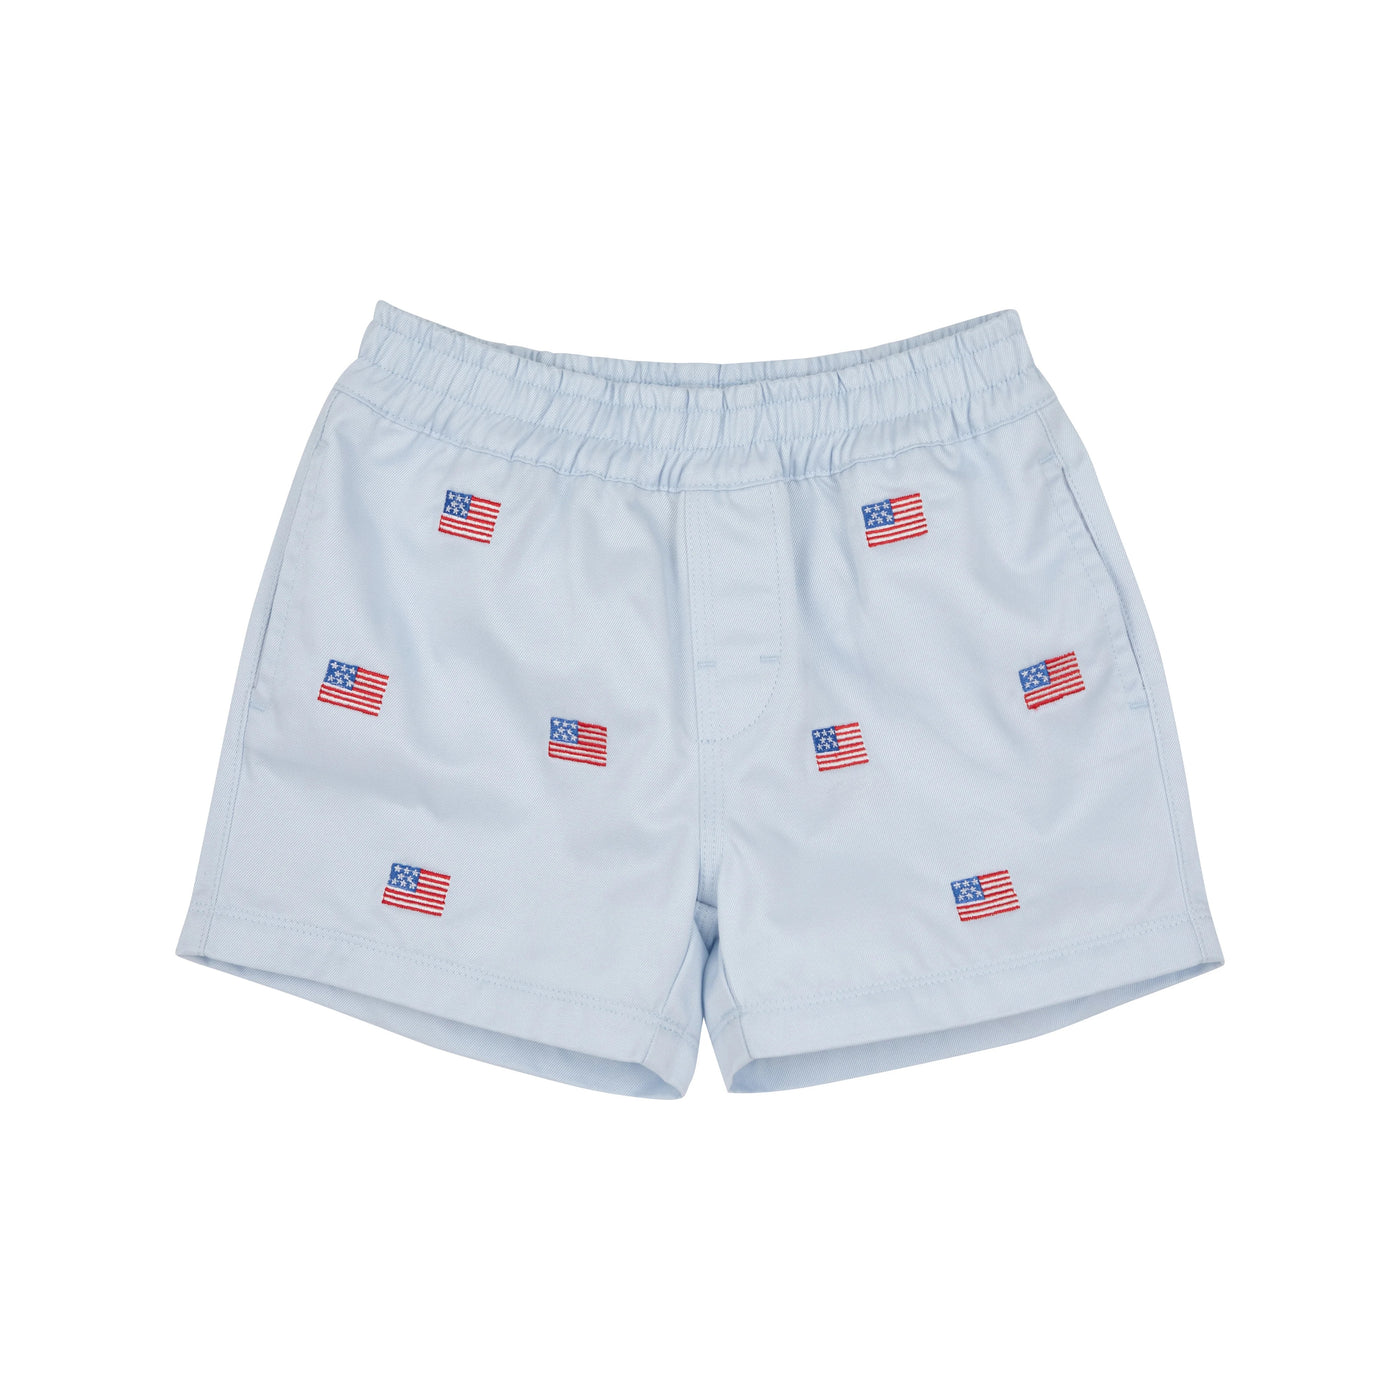 Critter Sheffield Shorts - Buckhead Blue & American Flag Embroidery With Multicolor Stork